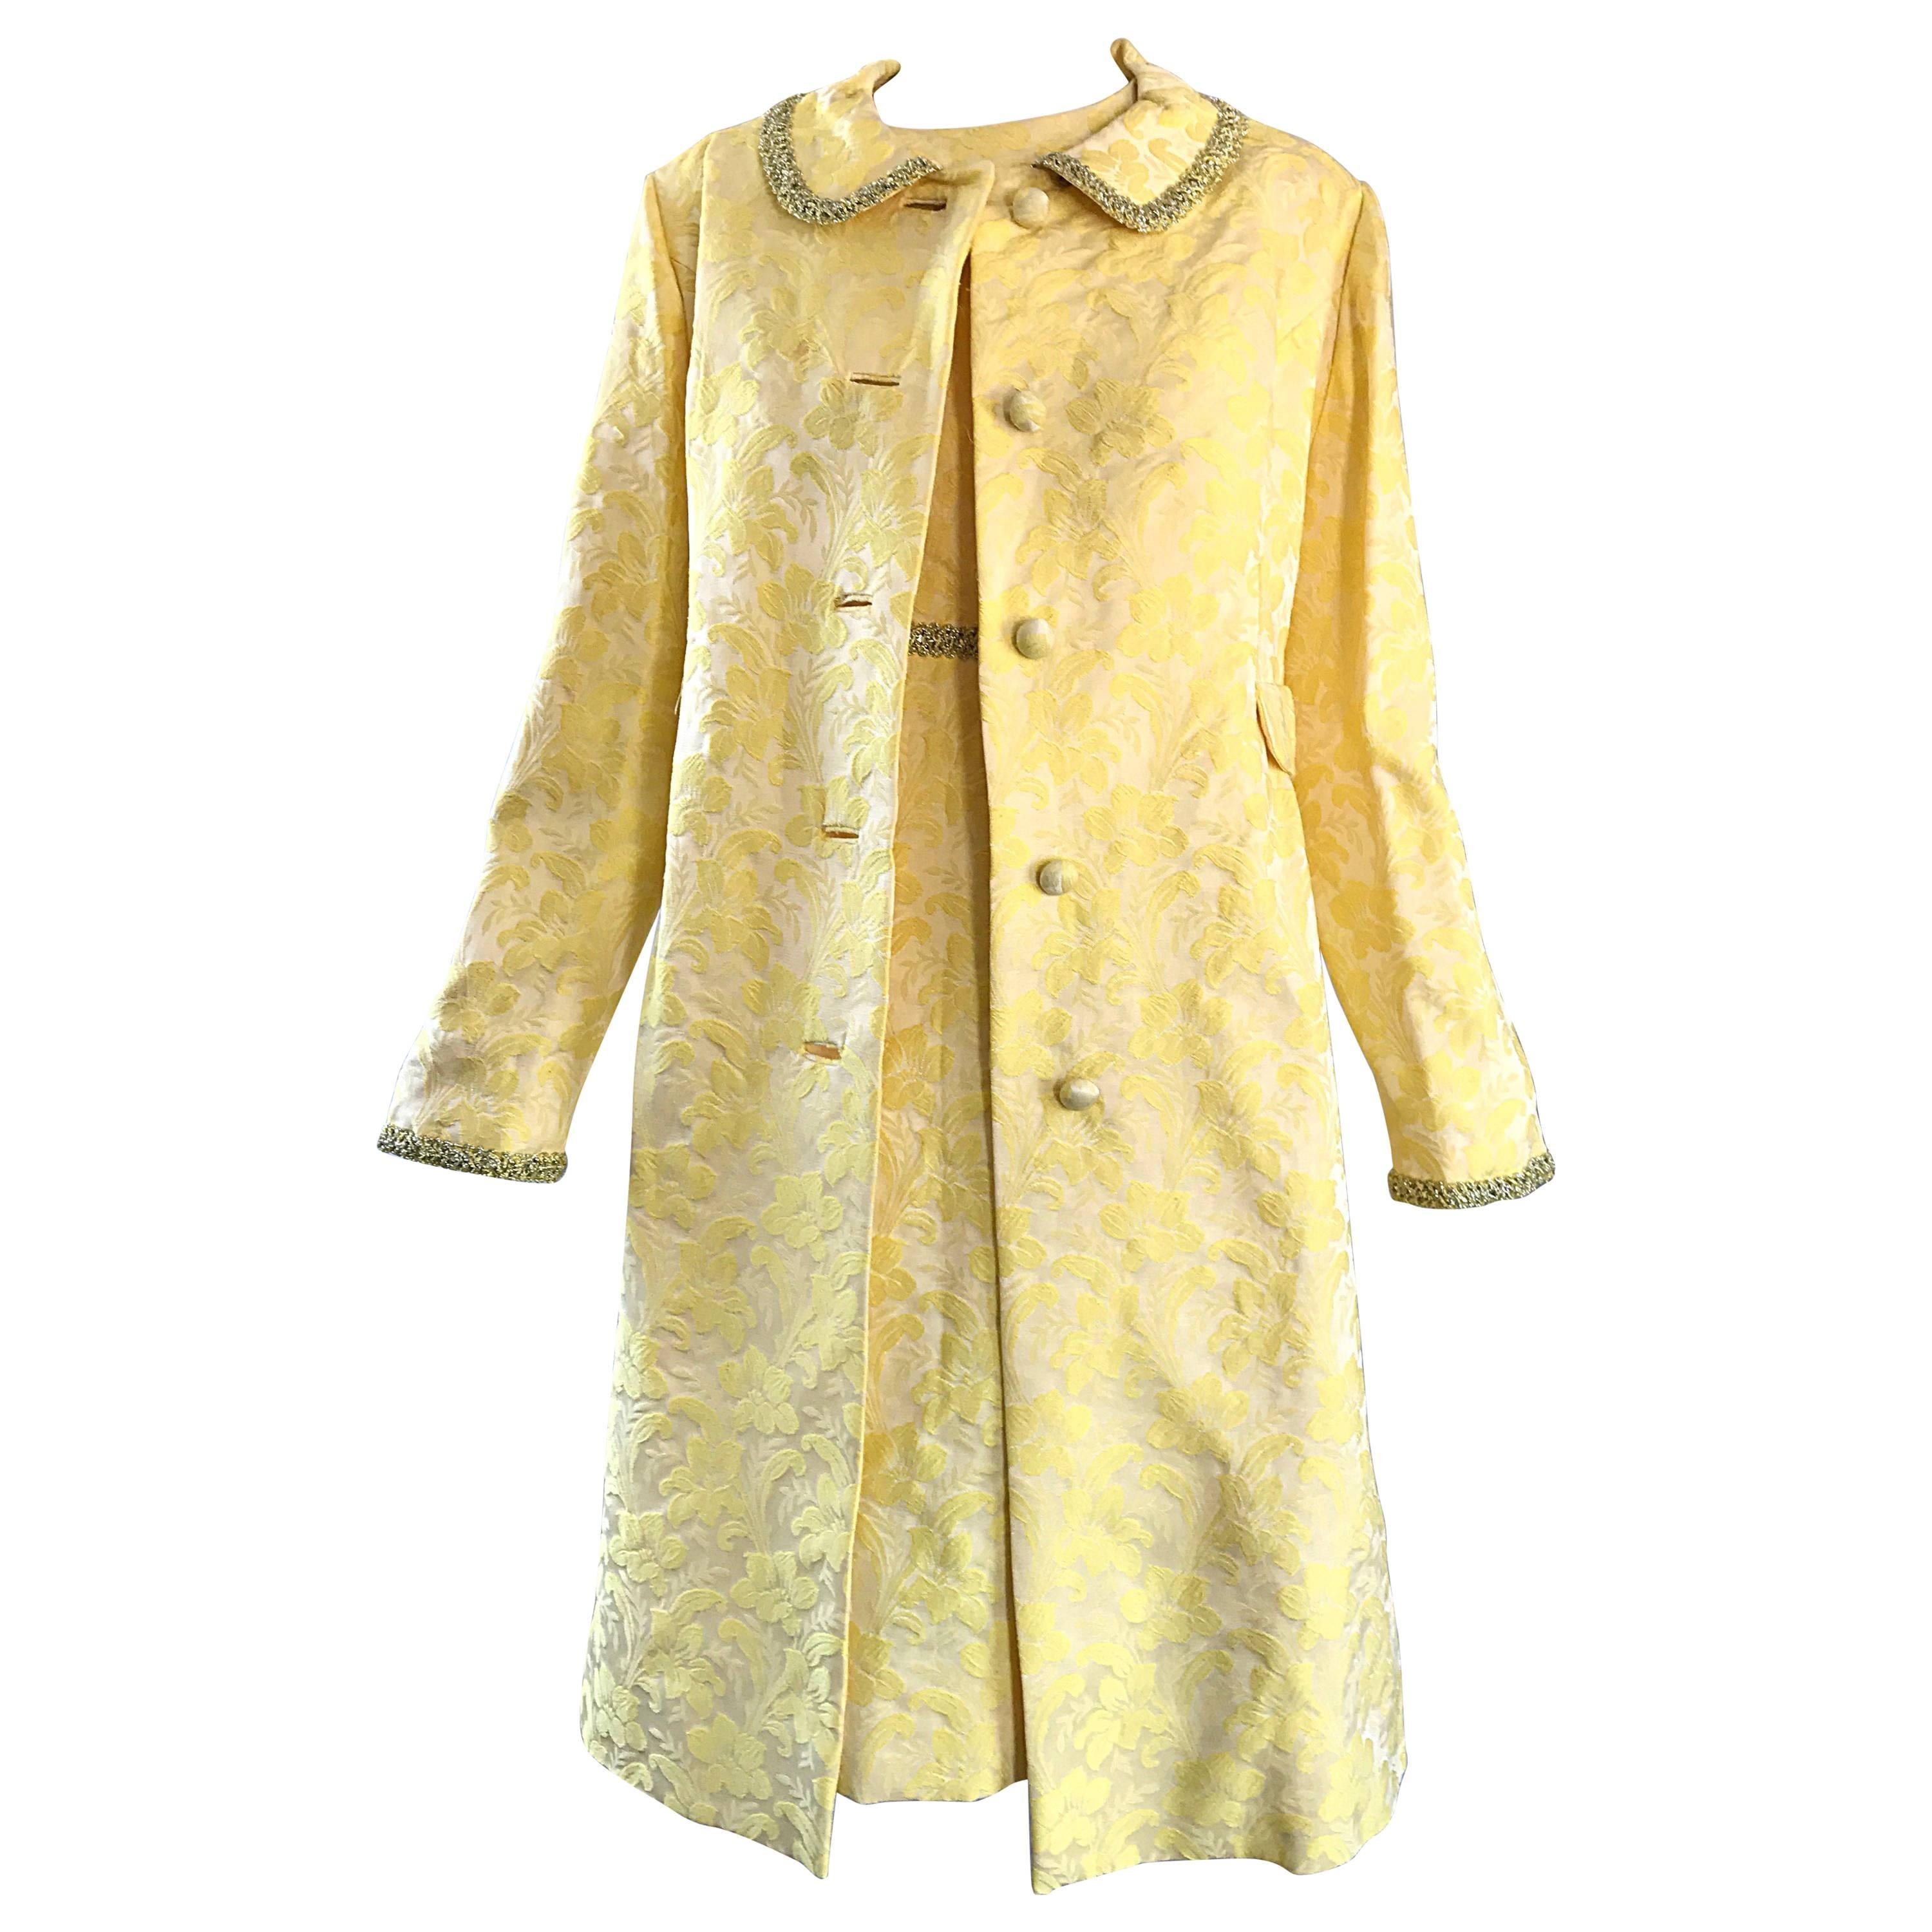 Chic 1960s Mademoiselle Canary Yellow Silk Borcade A - Line Dress & Jacket Suit